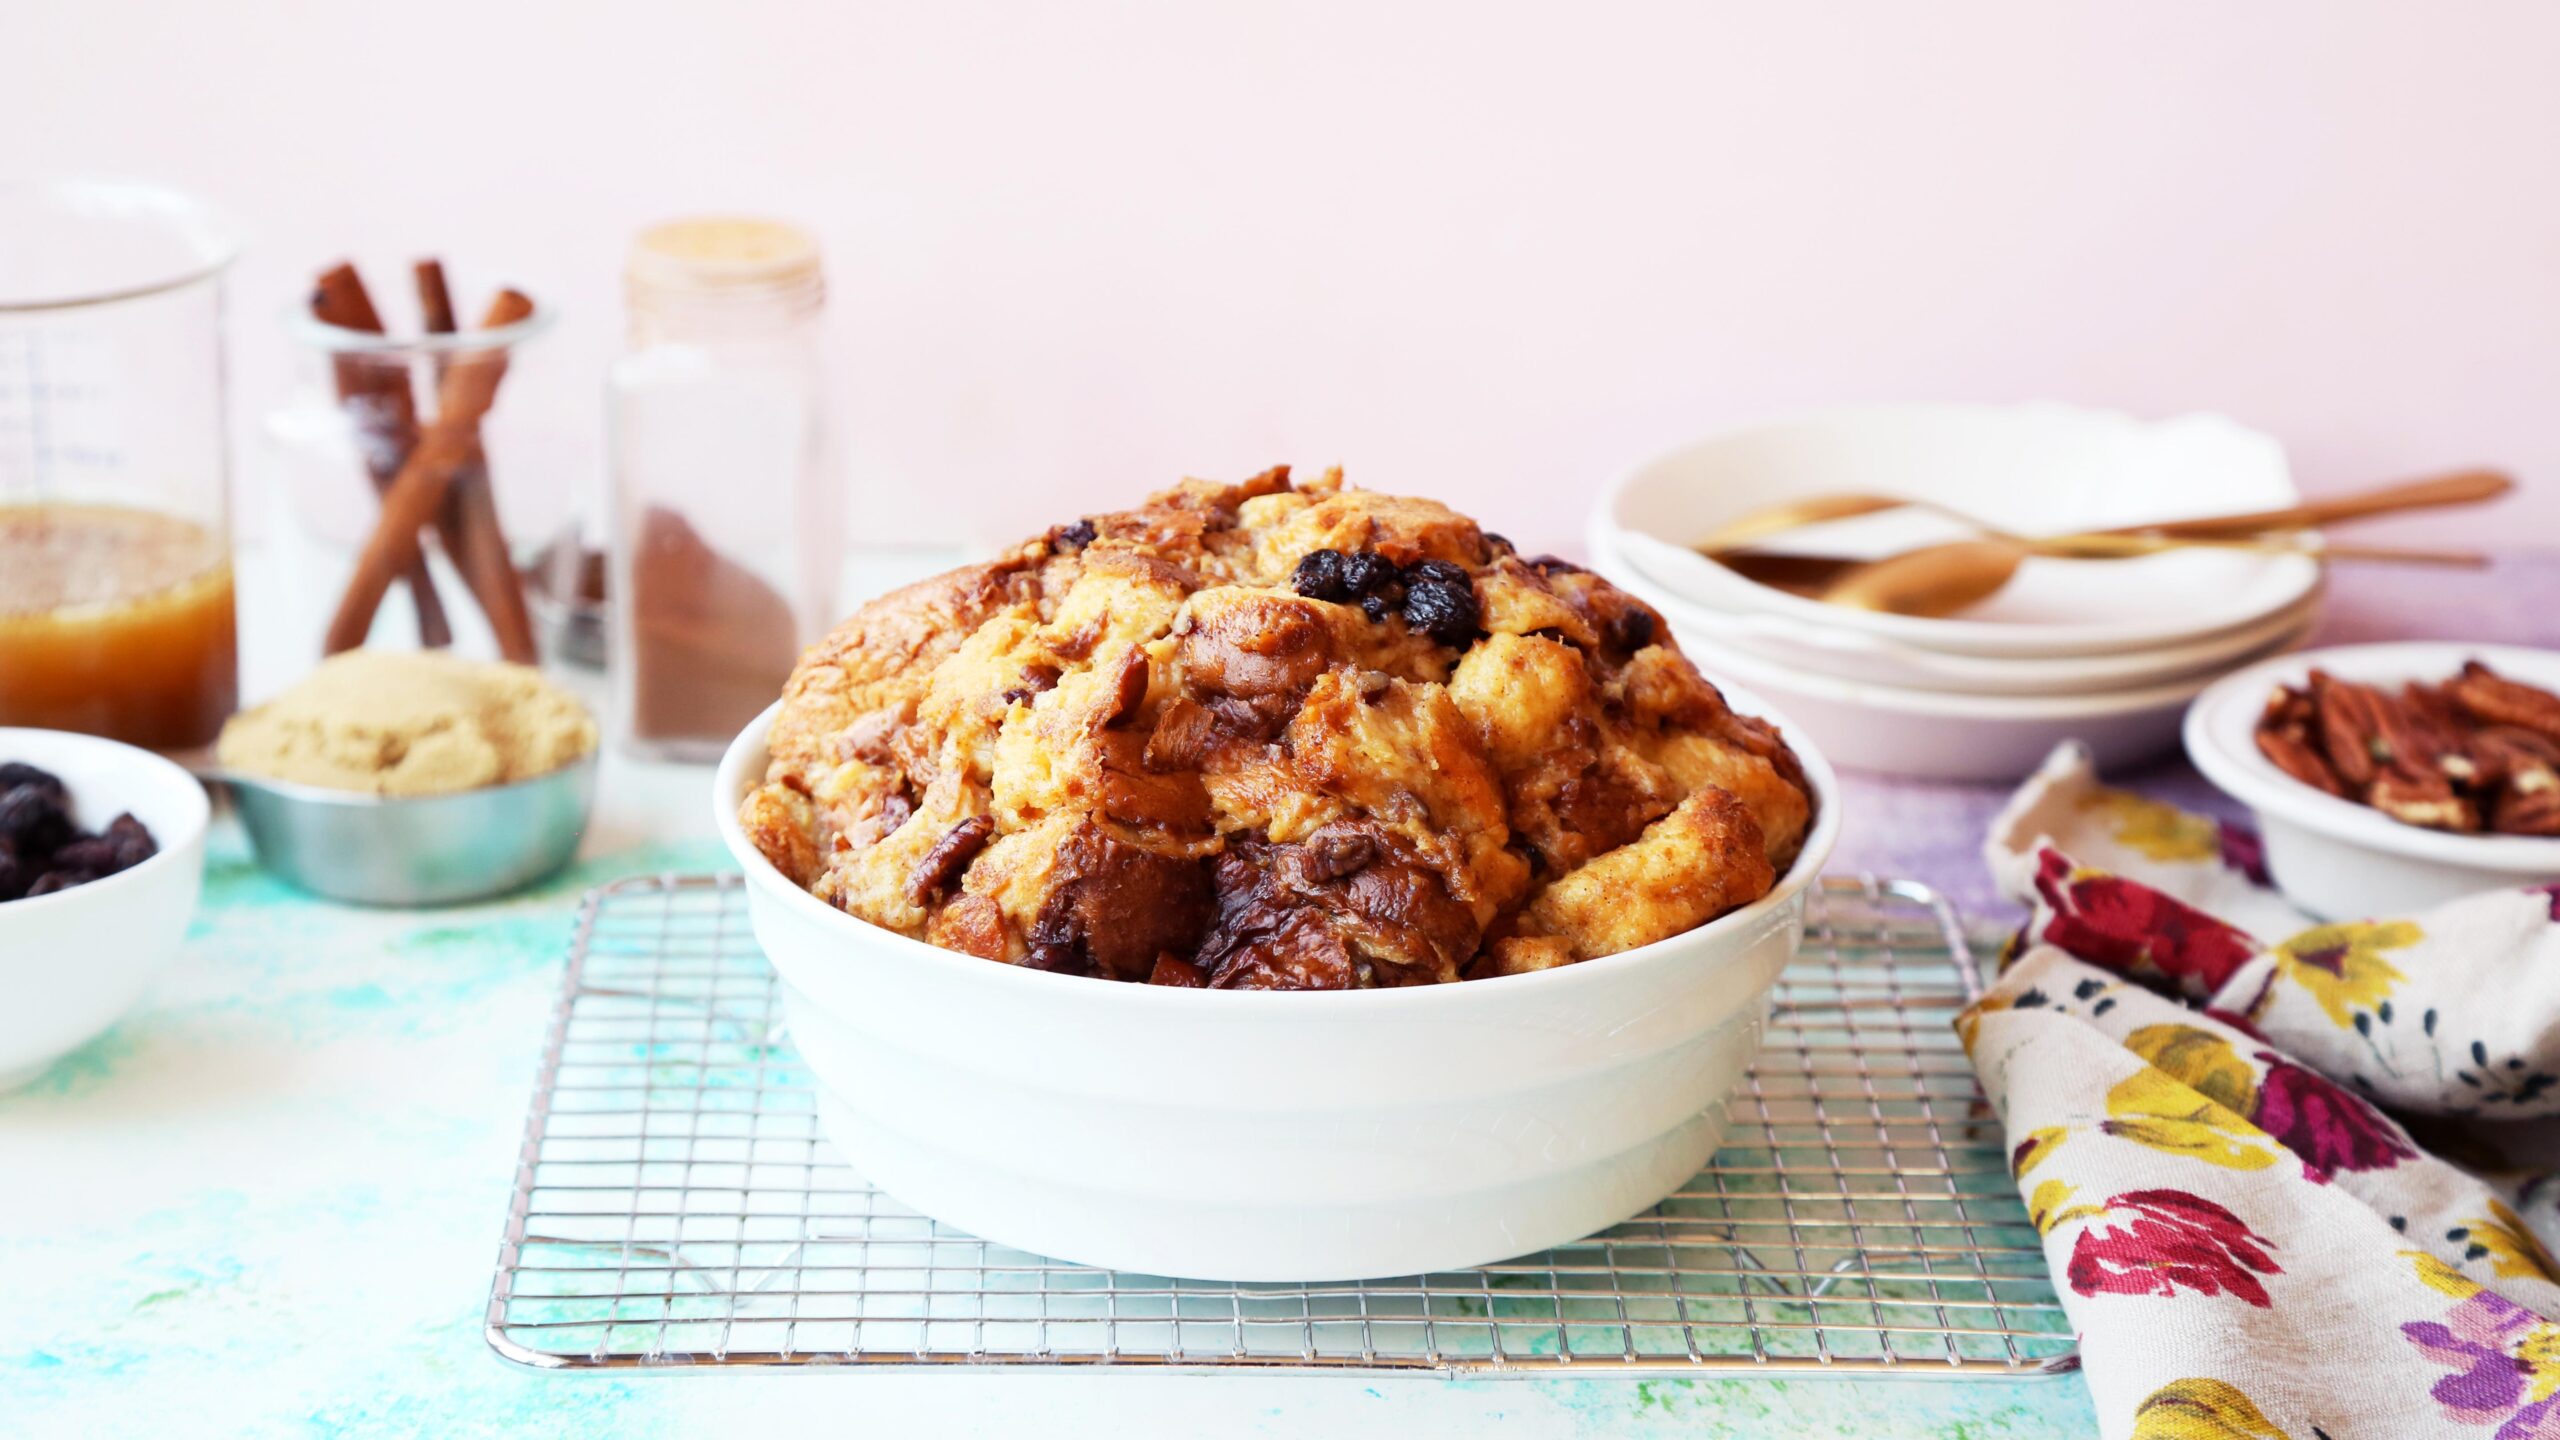  A slice of warm and custardy Instant Pot bread pudding.